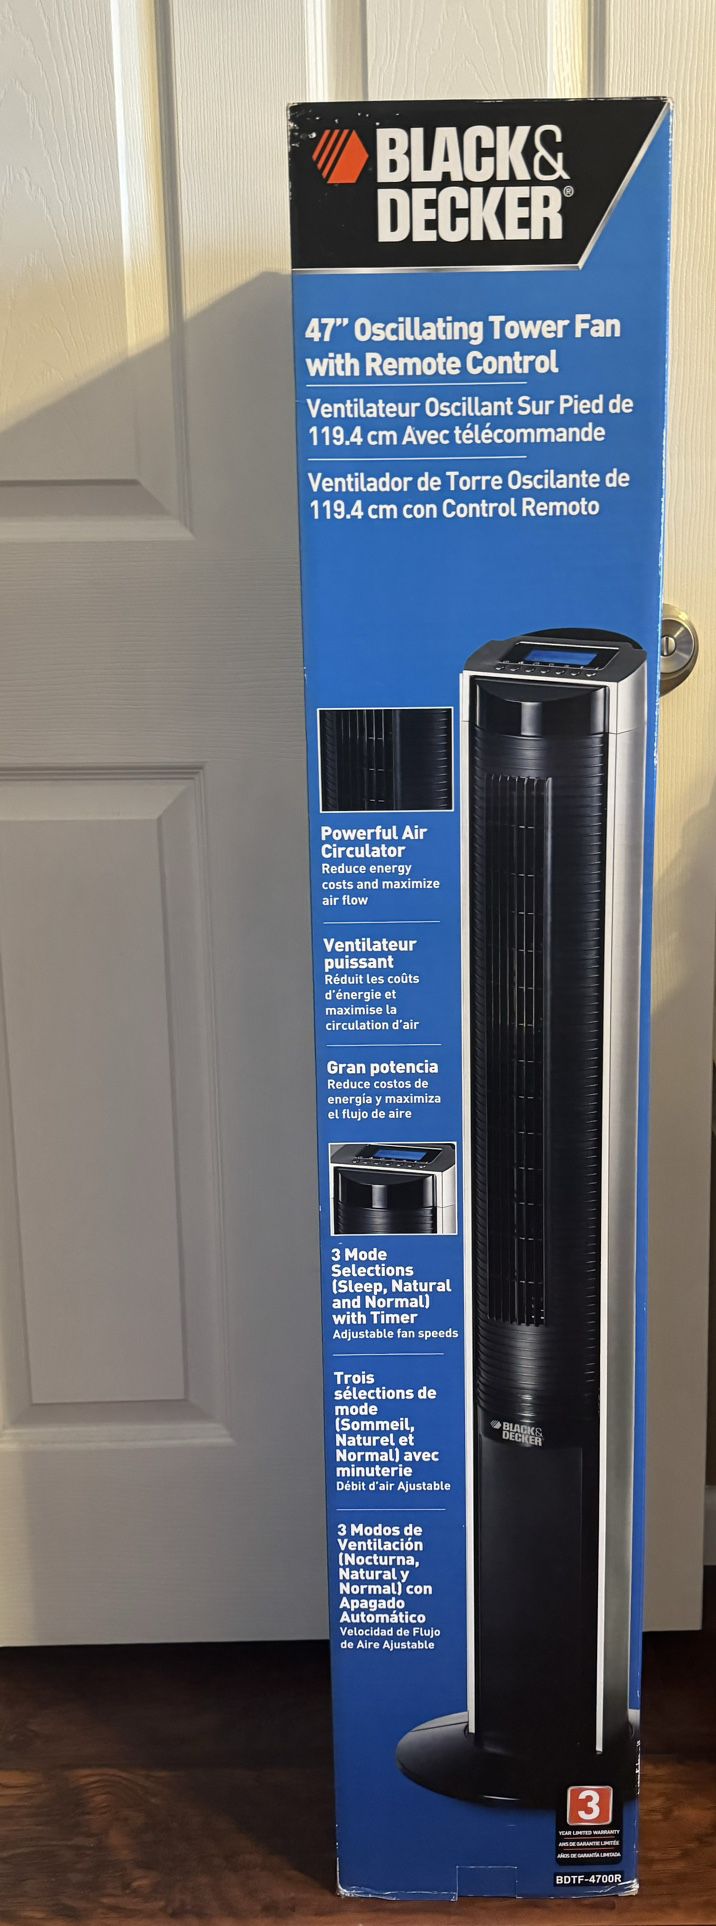 47" Oscillating Tower Fan with Remote Control